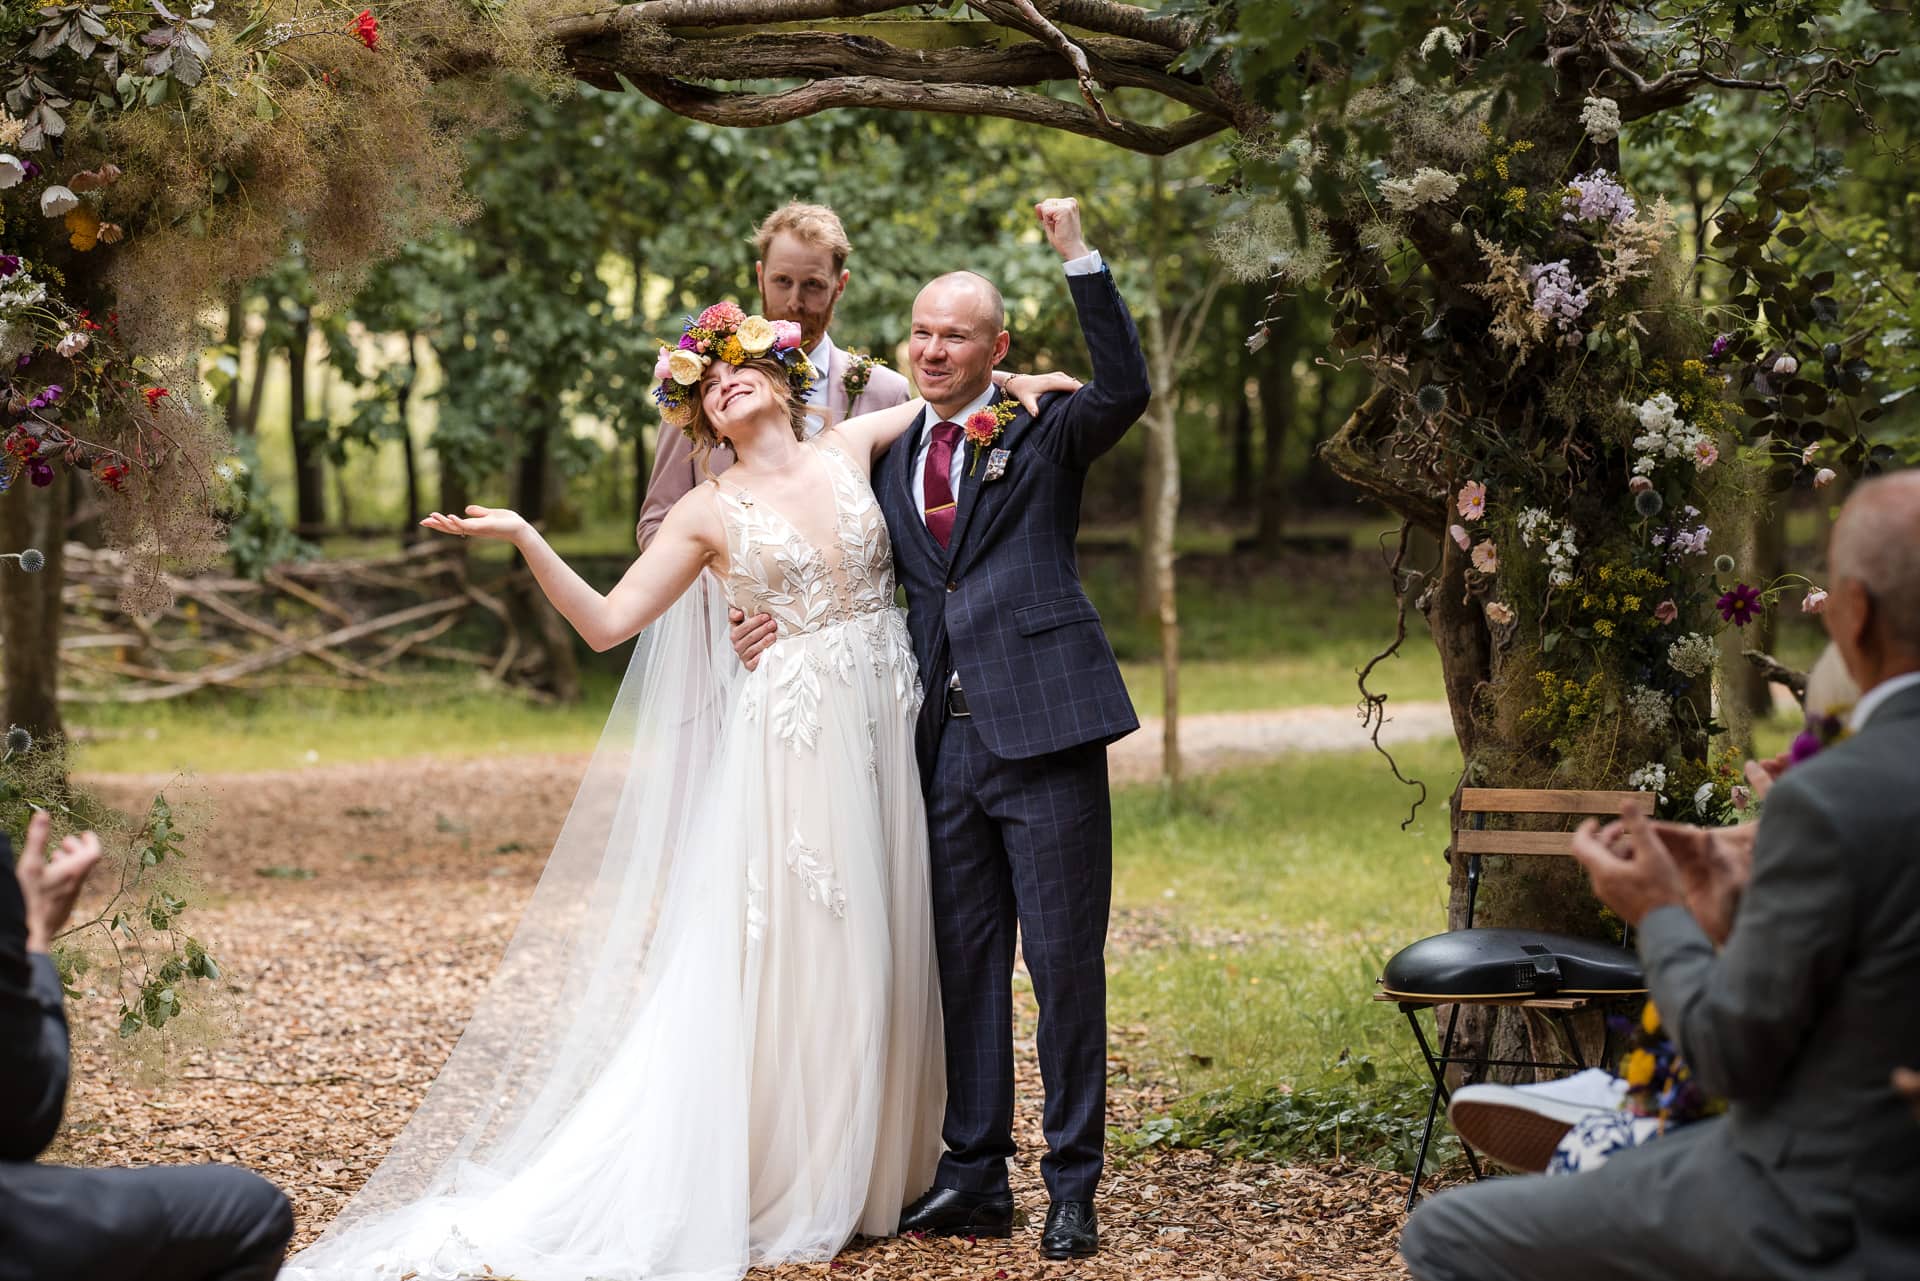 Just married at the Endeavour Woodland wedding venue